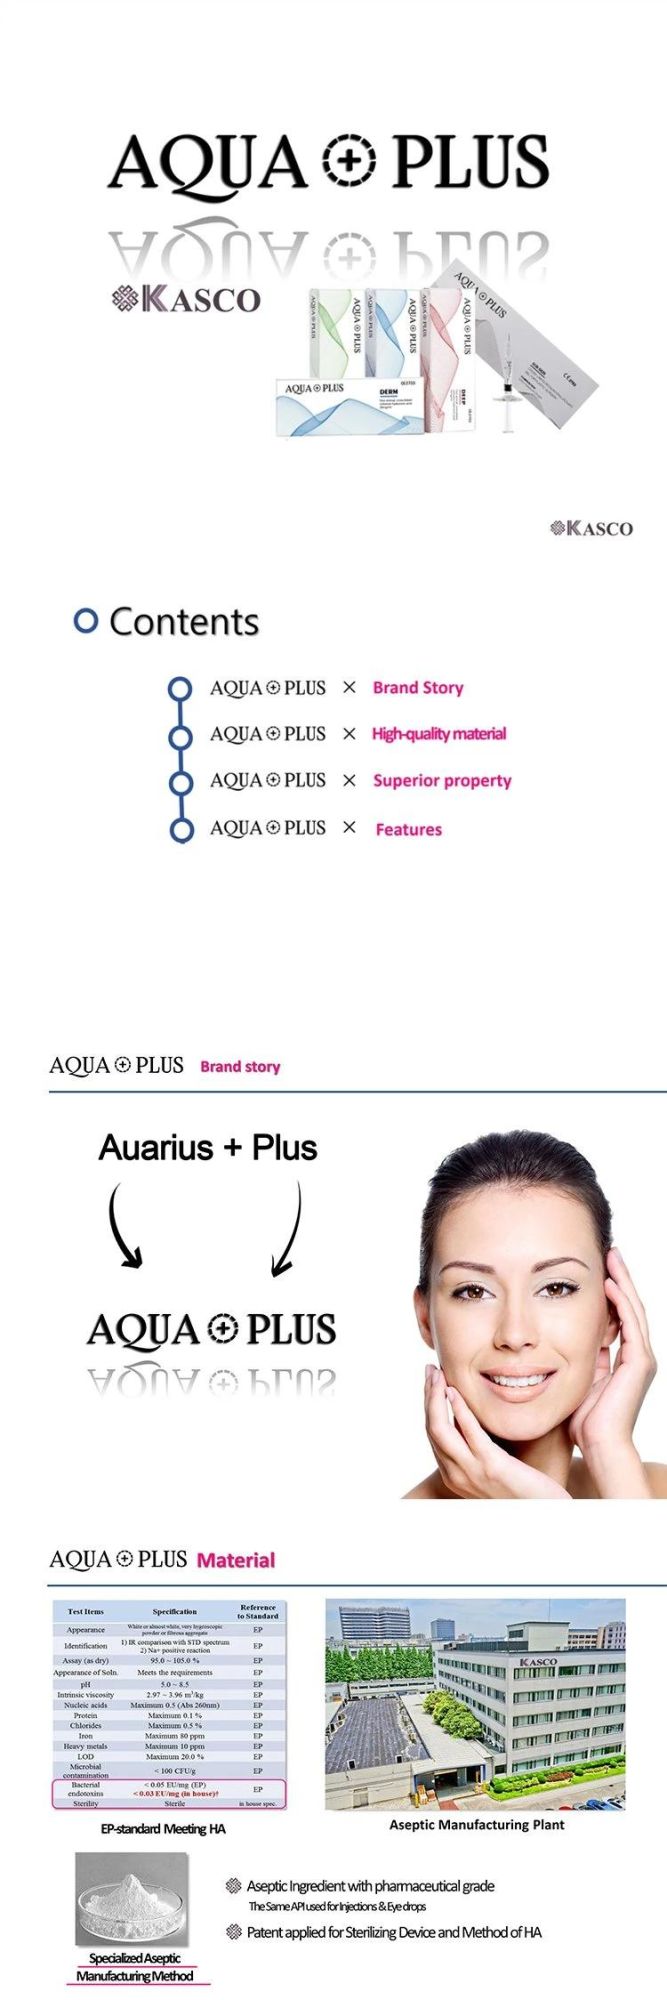 Aqua Plus Mesotherapy Dermal Filler Intradermal Injection 5ml Hyaluronic Acid for Whitening Hydrating